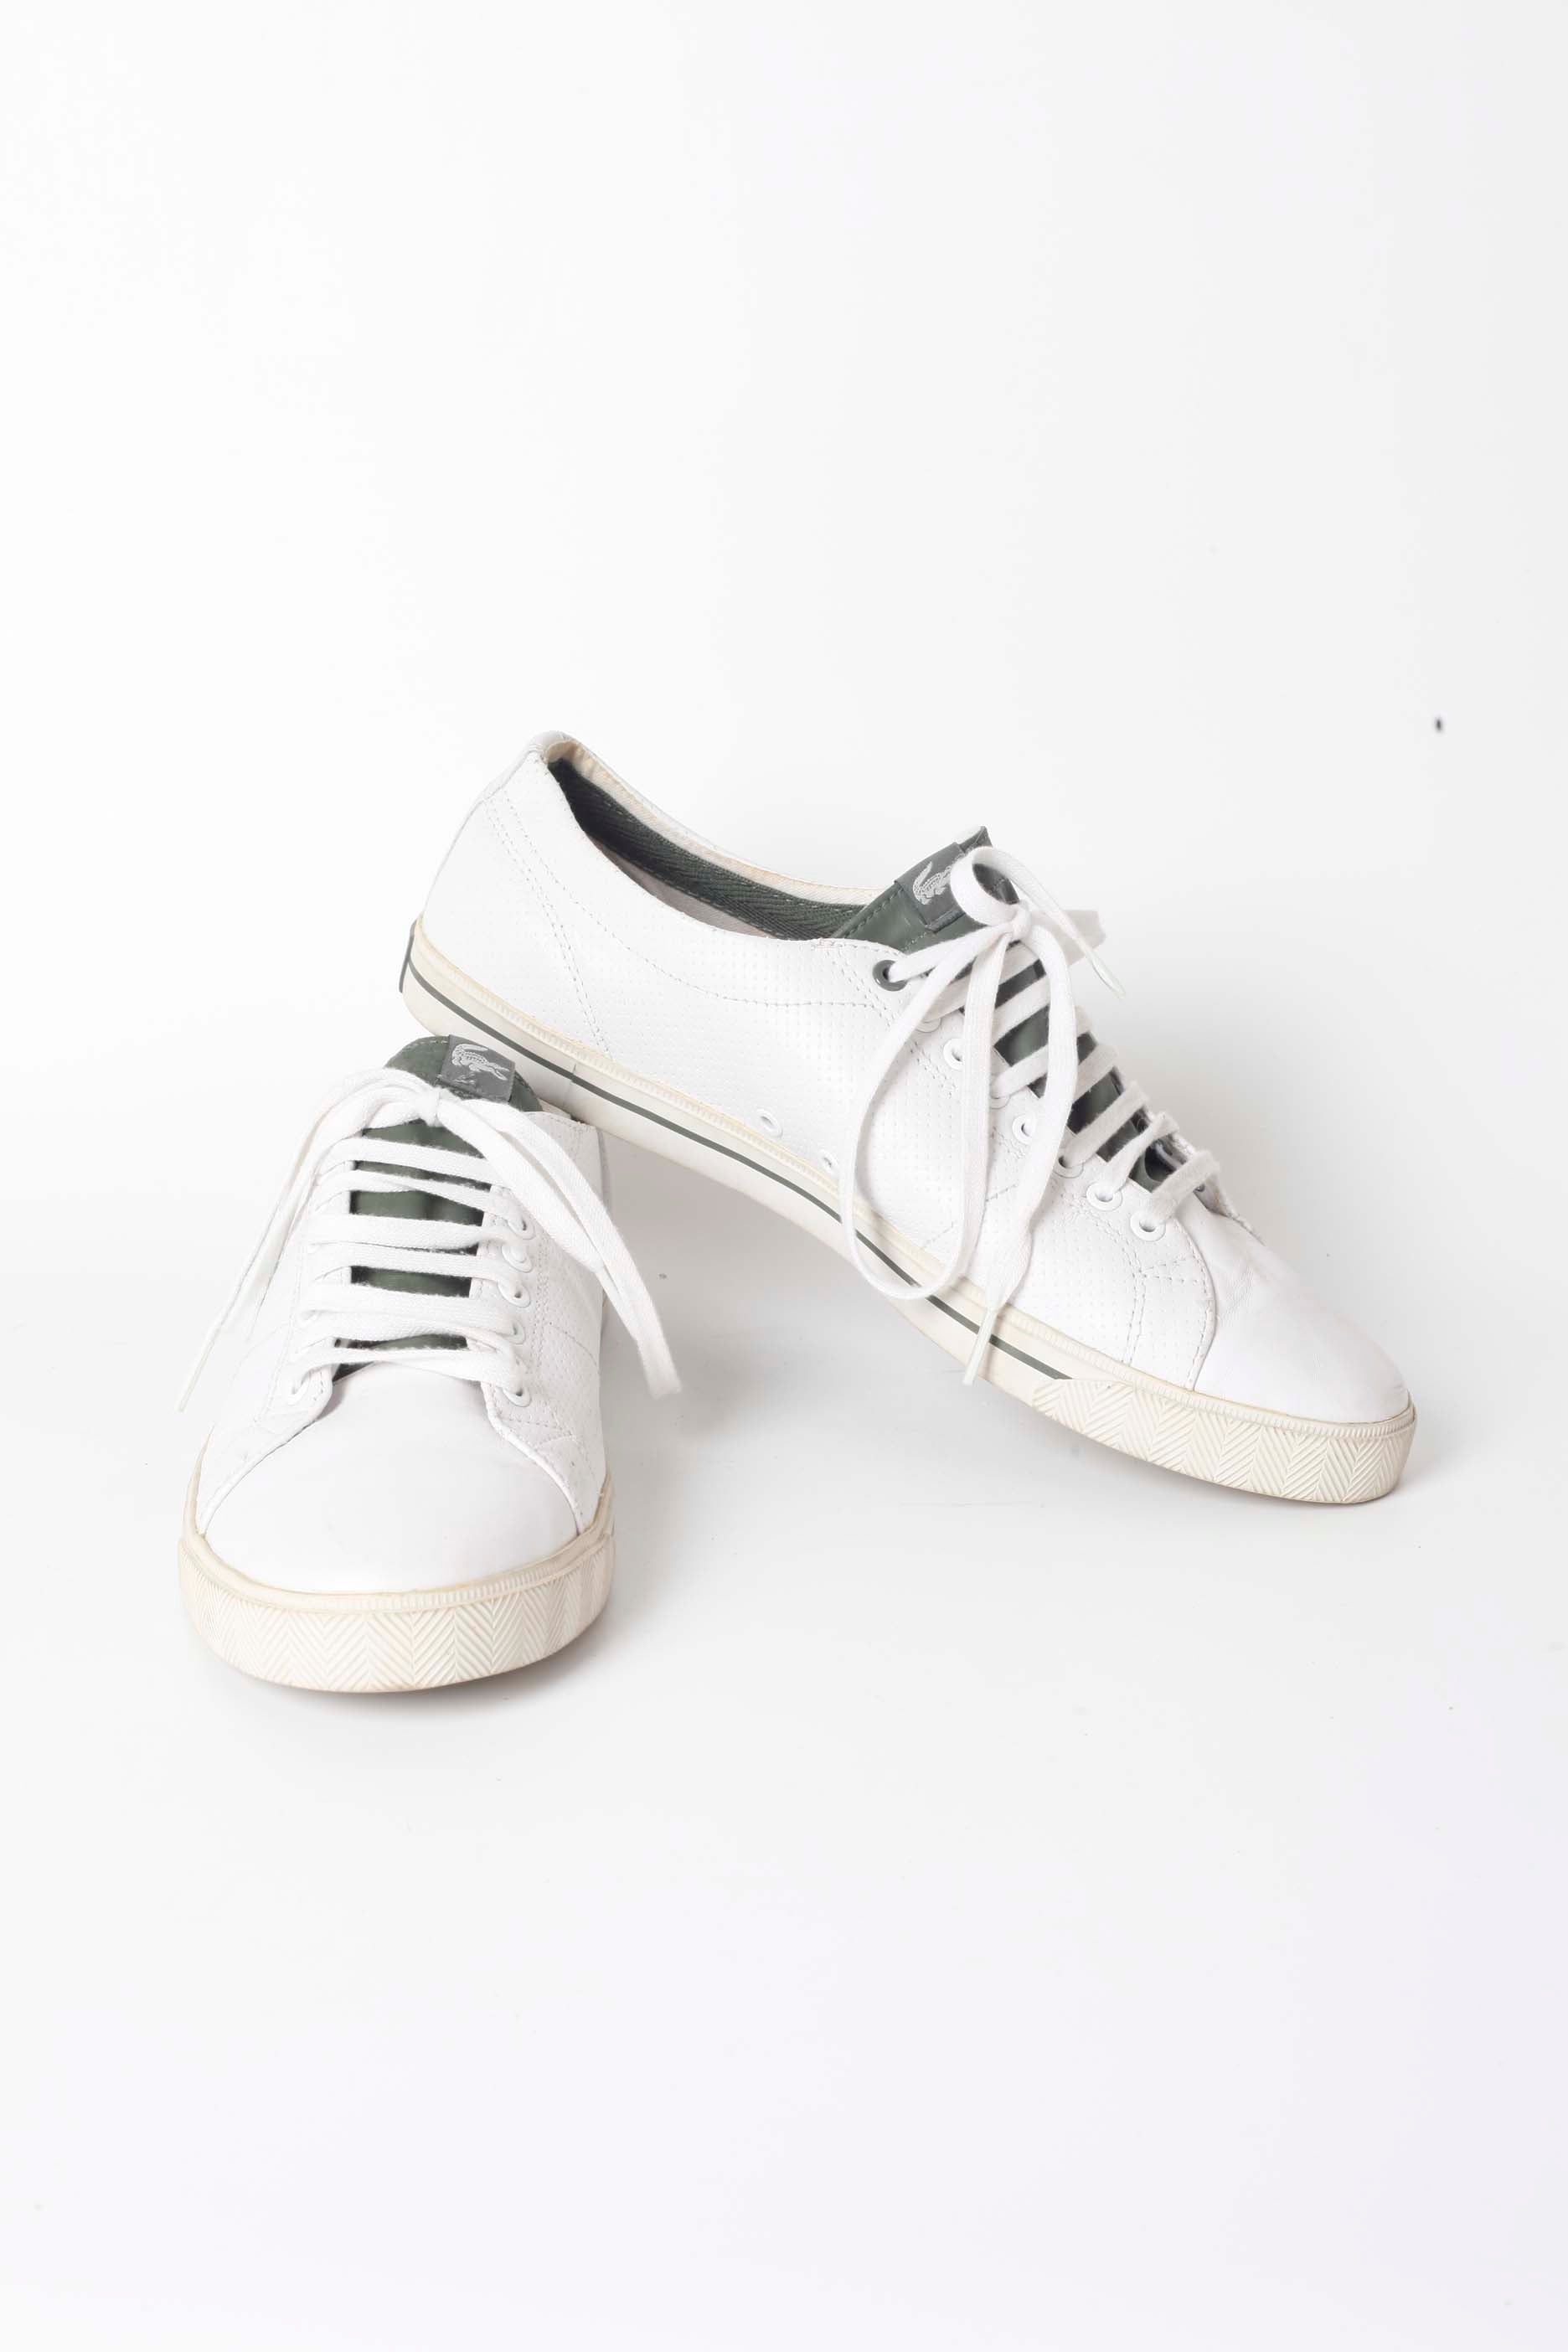 Mens White Lacoste Sneakers